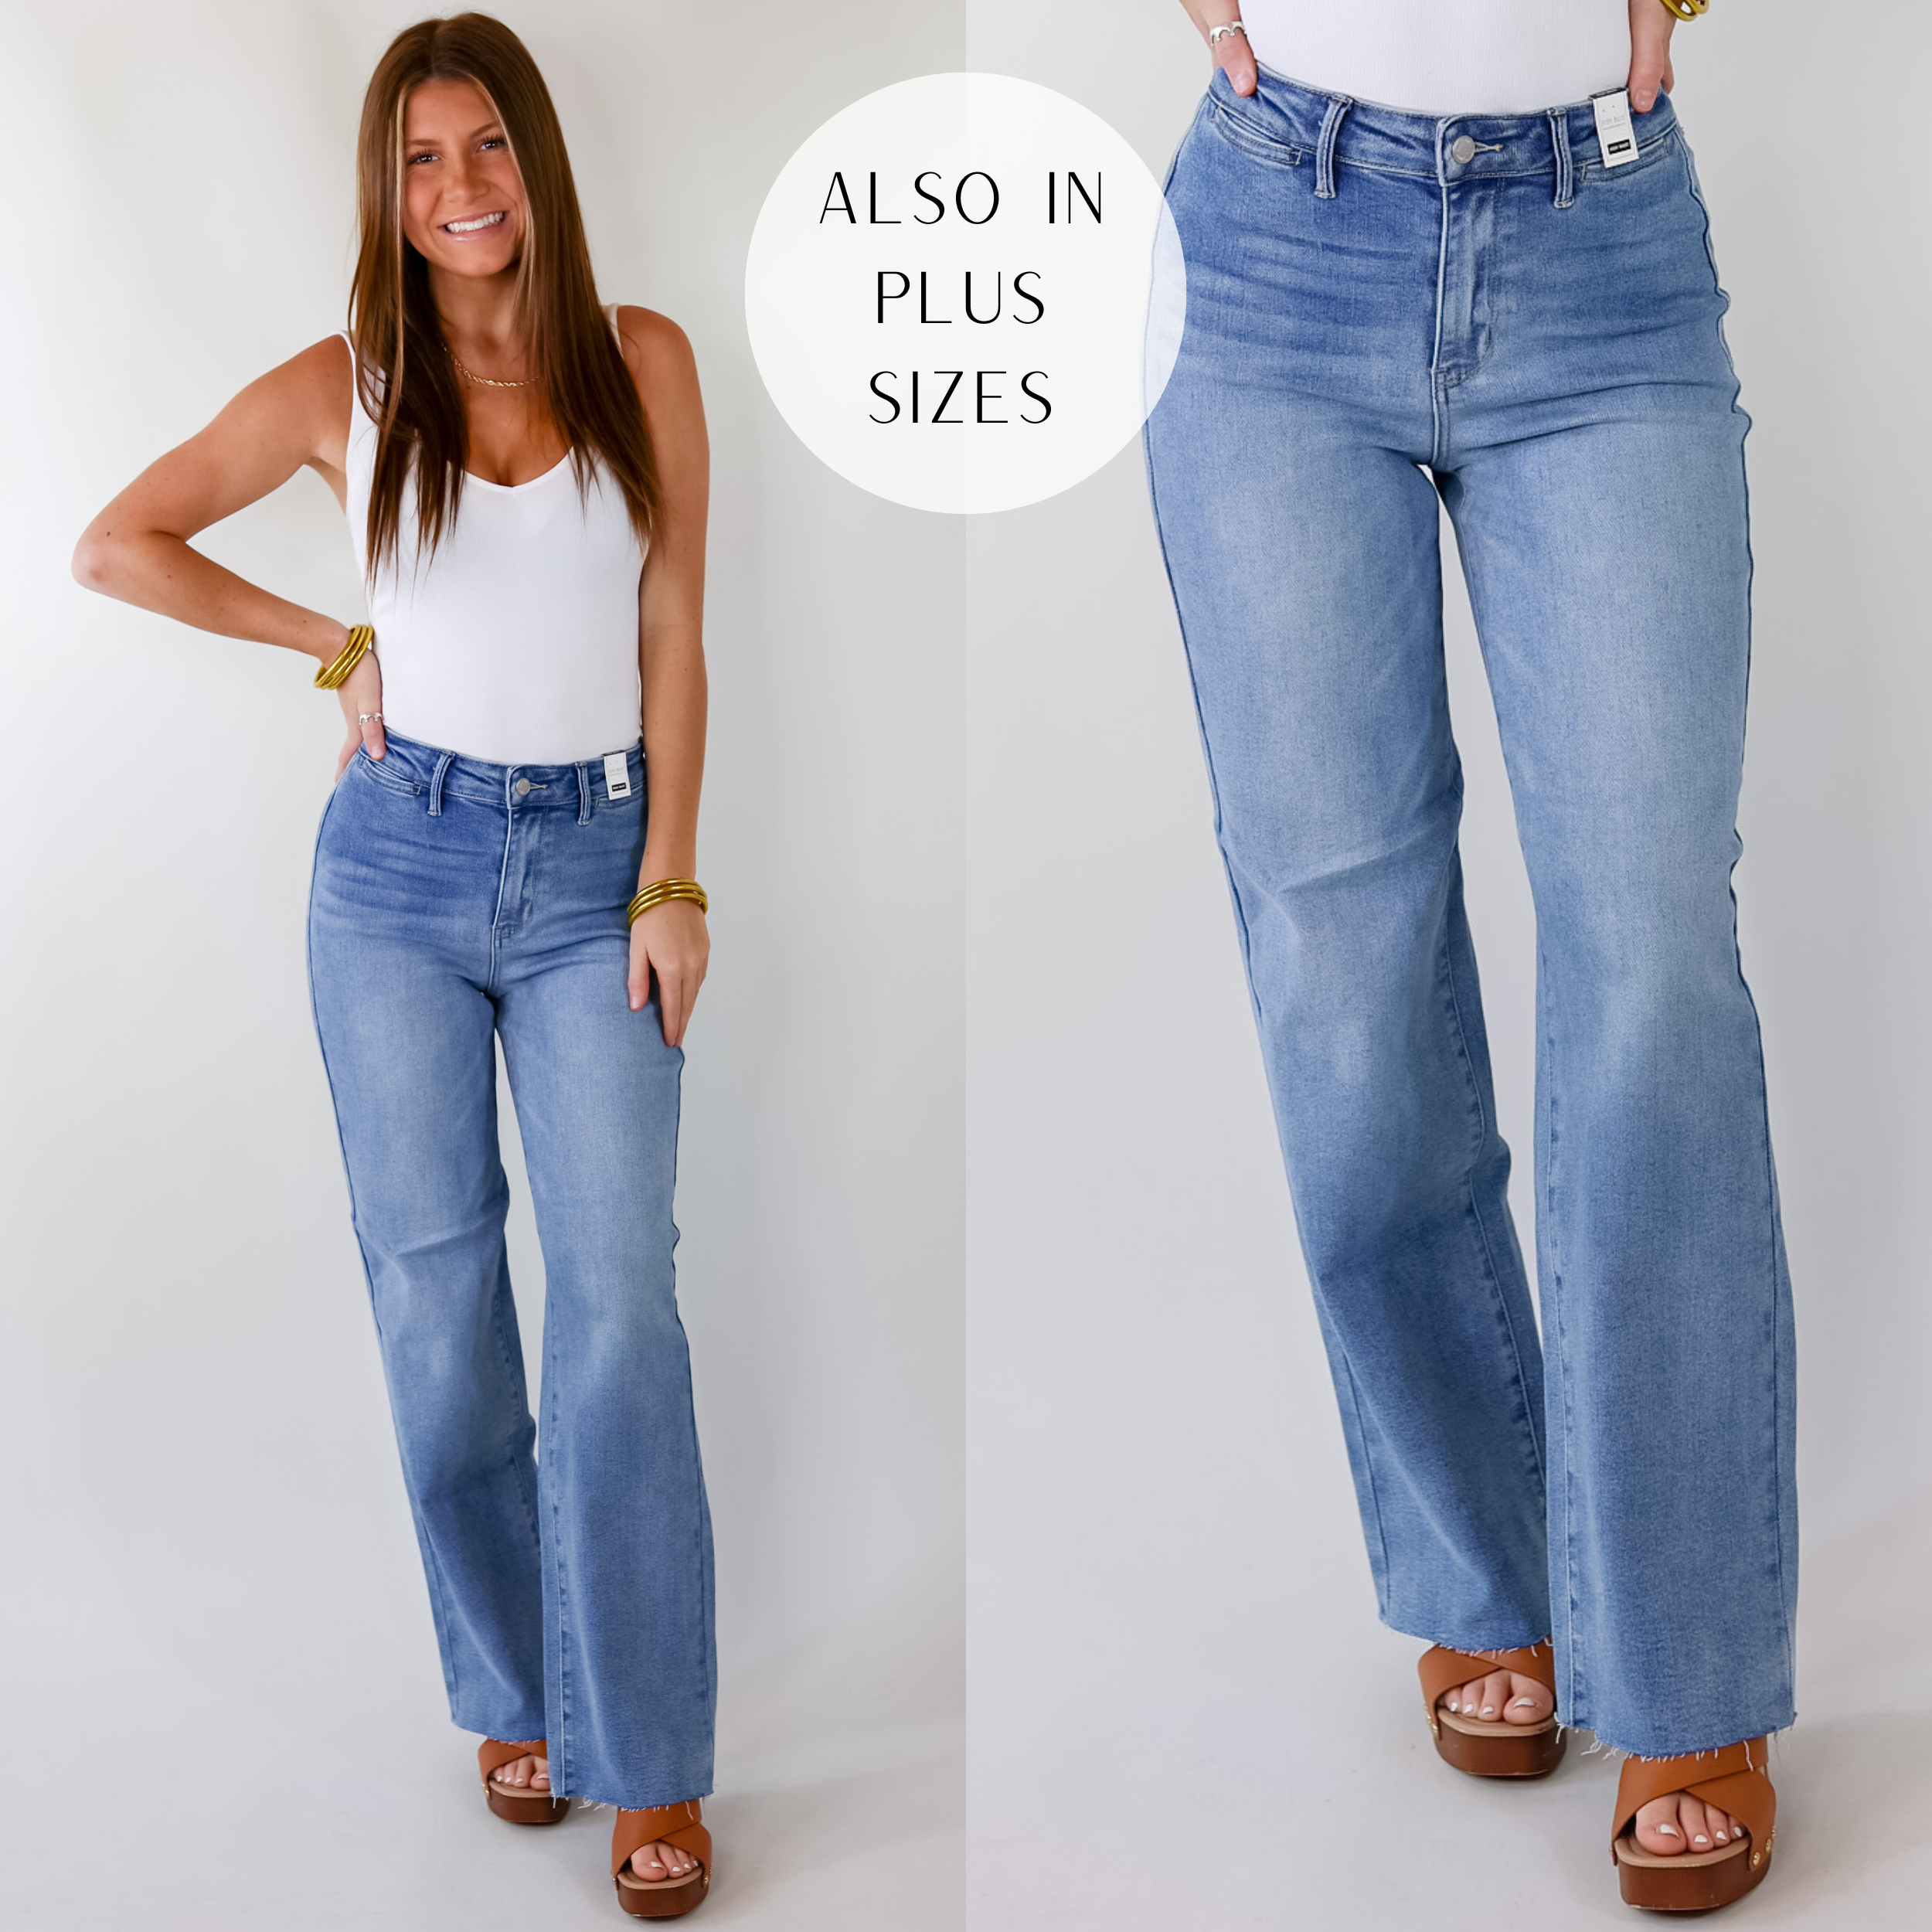 More of Me to Love Denim Jeans Pants Waistband Extender 3-Pack Set 